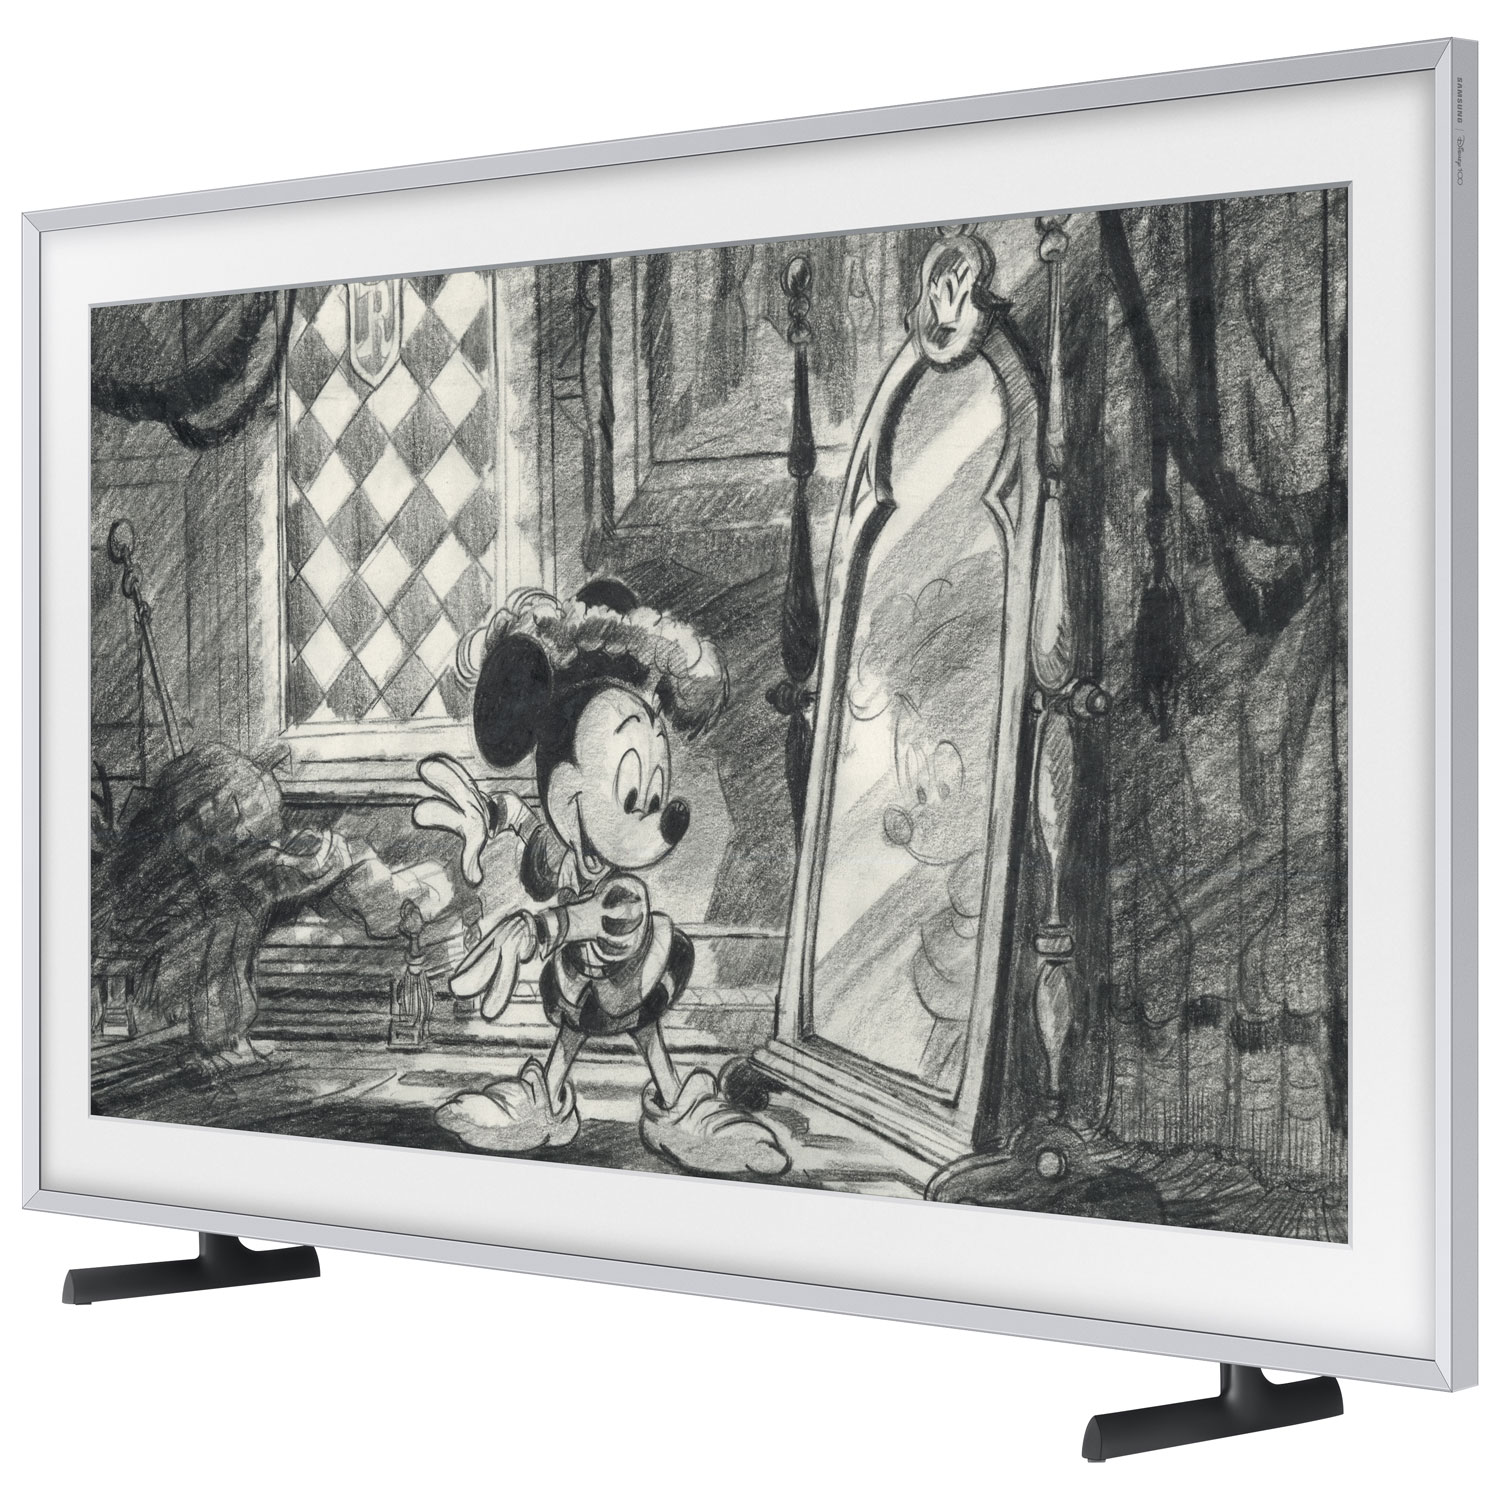 Samsung Launches Special Disney-Themed Version of The Frame TV